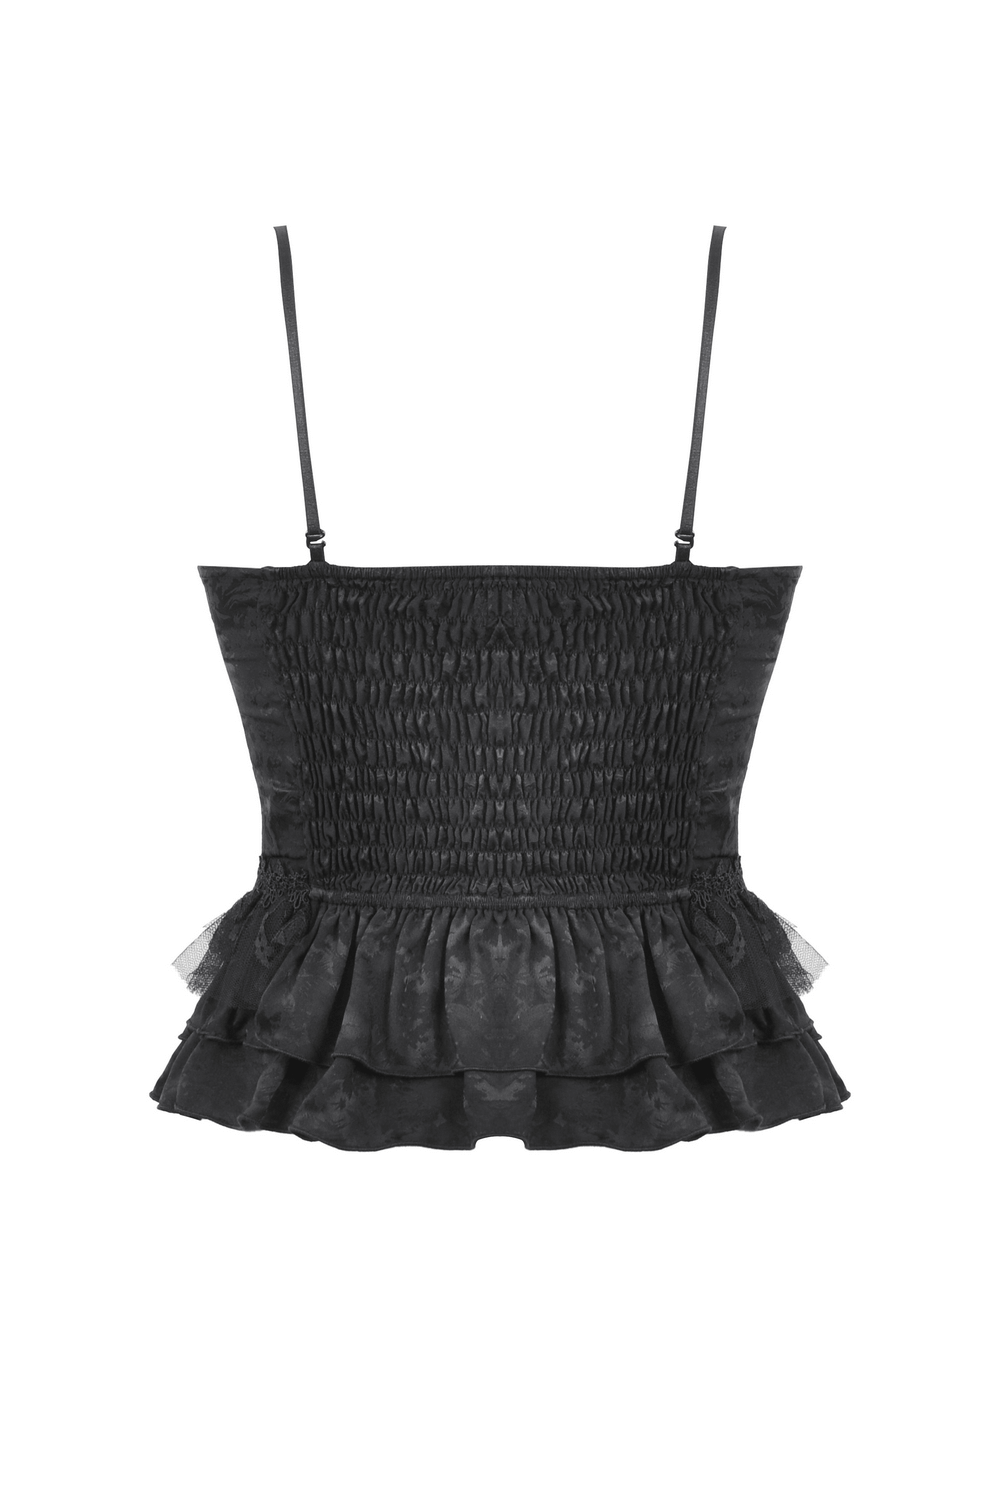 Gothic Corset Top with Lace and Polka Dot Detailing